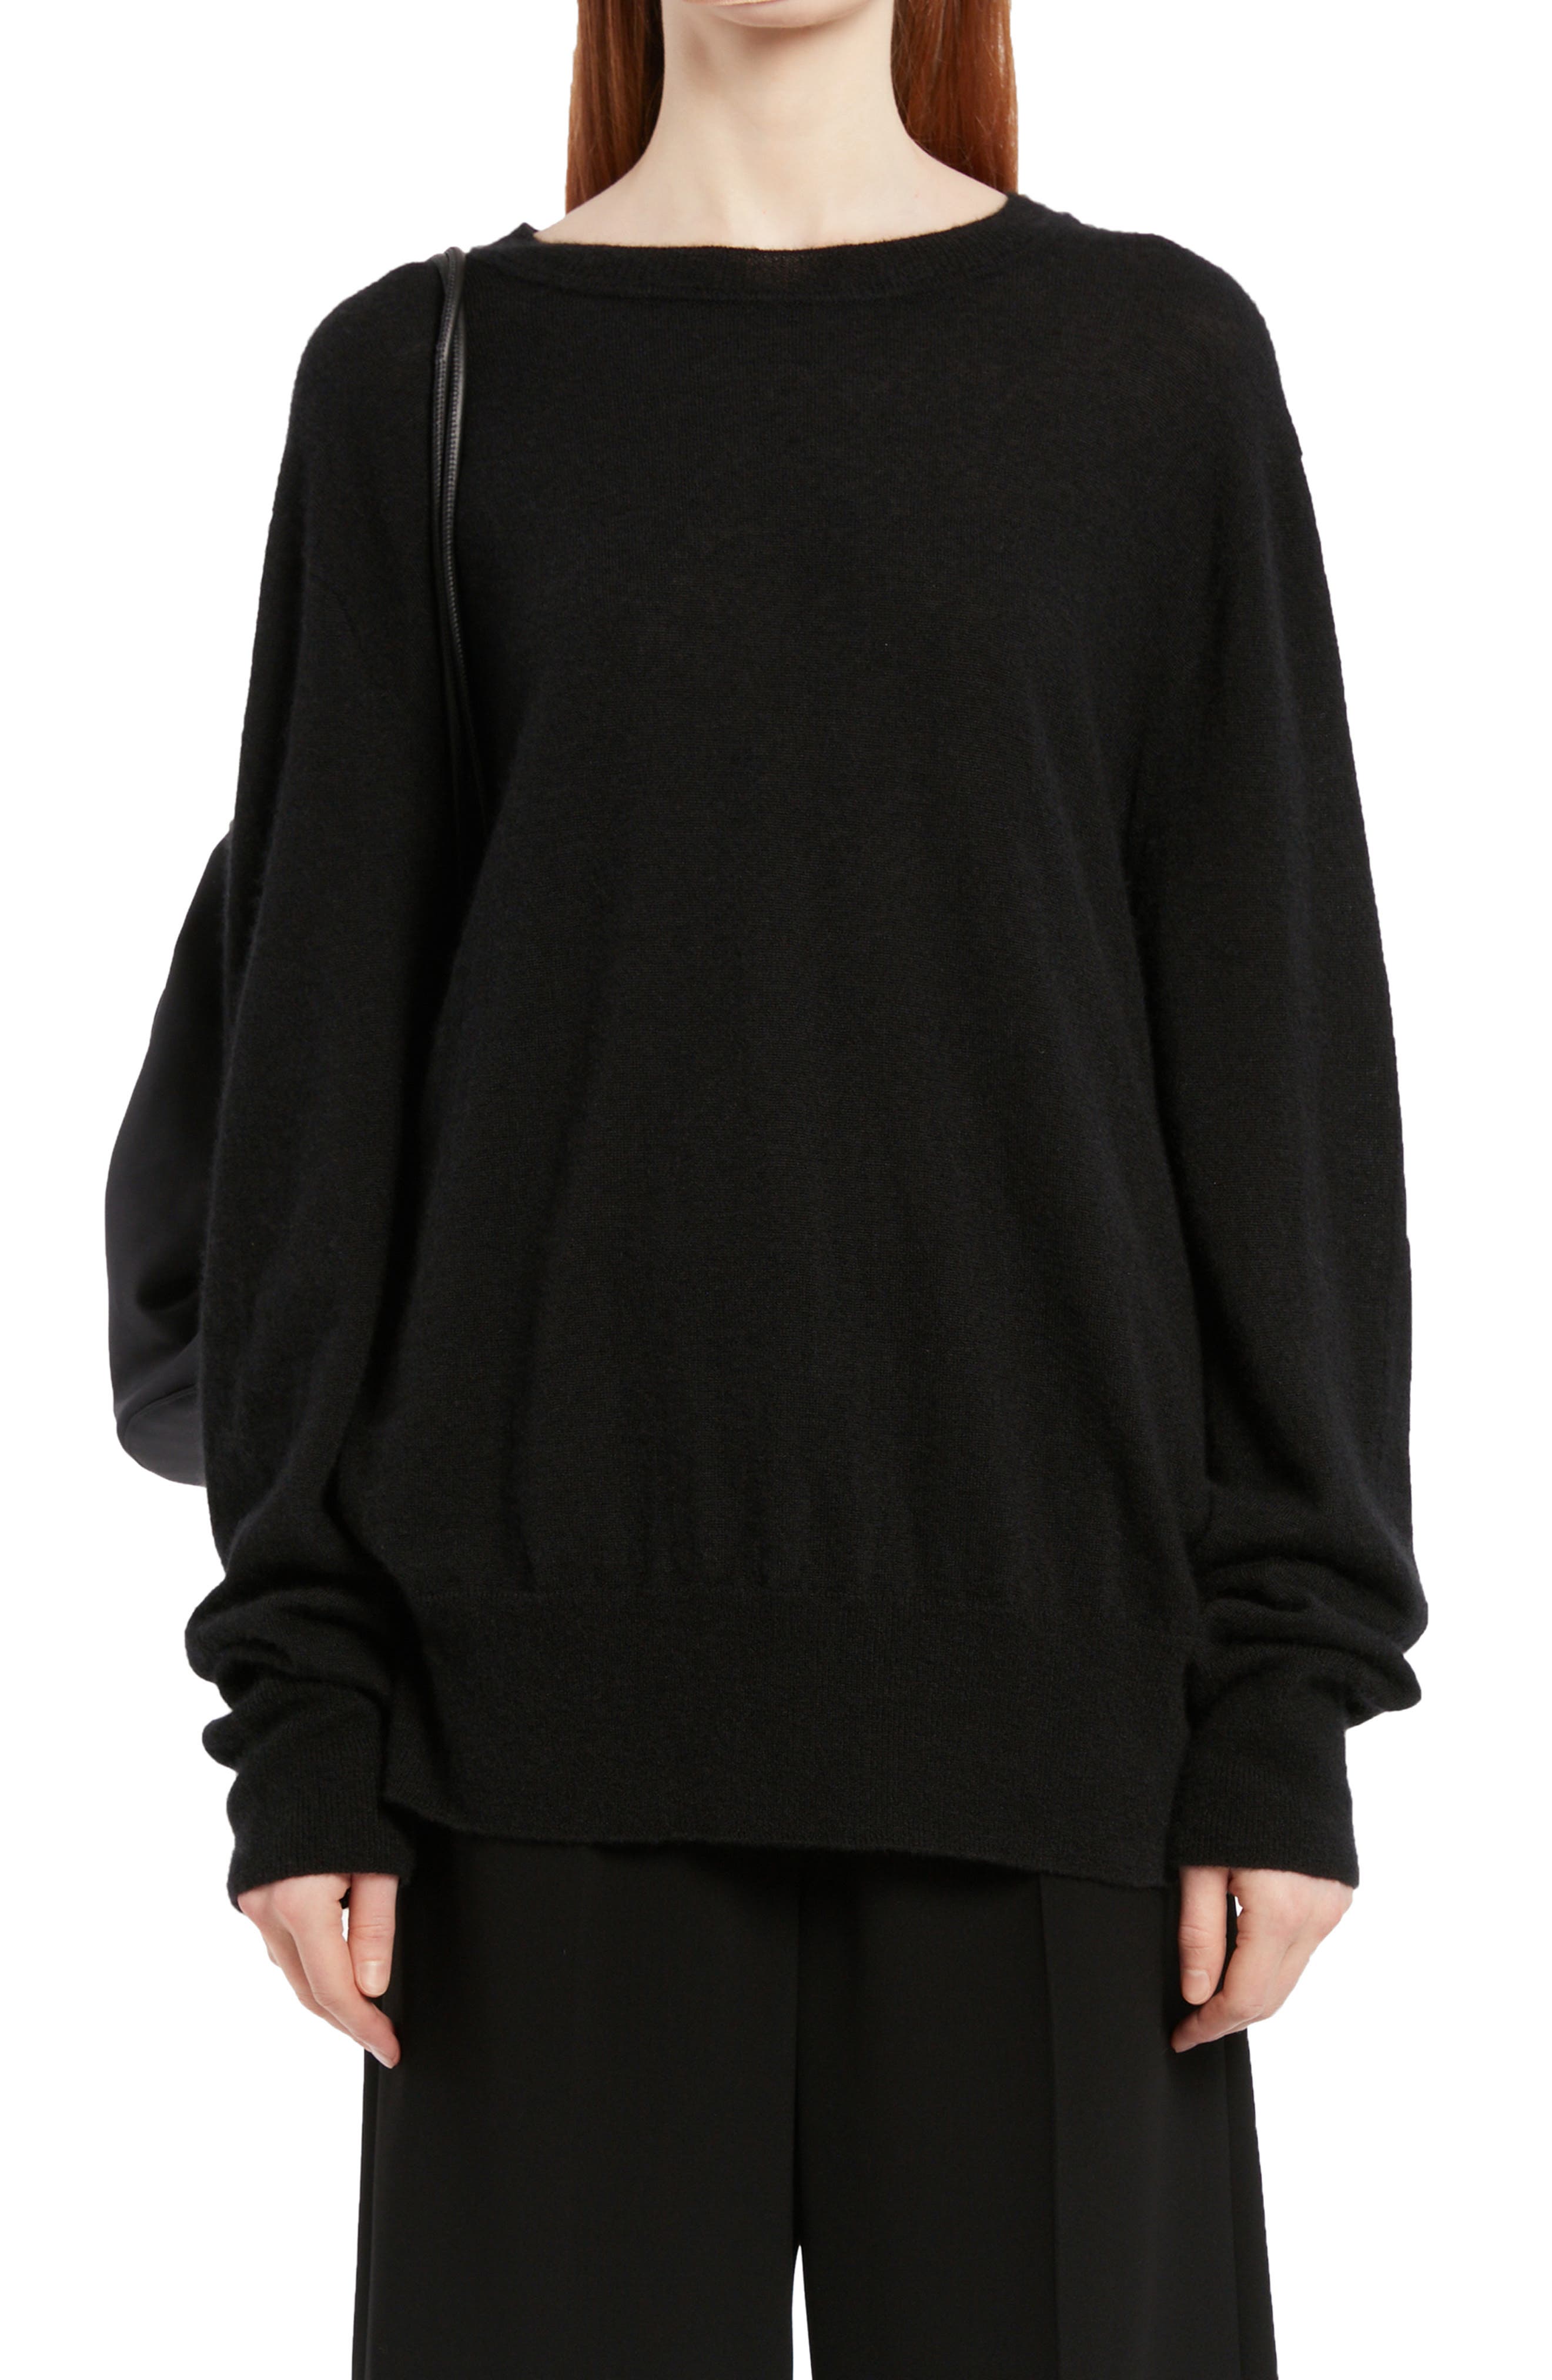 The Row Sibem Cashmere & Silk Sweater in Black at Nordstrom, Size X-Small